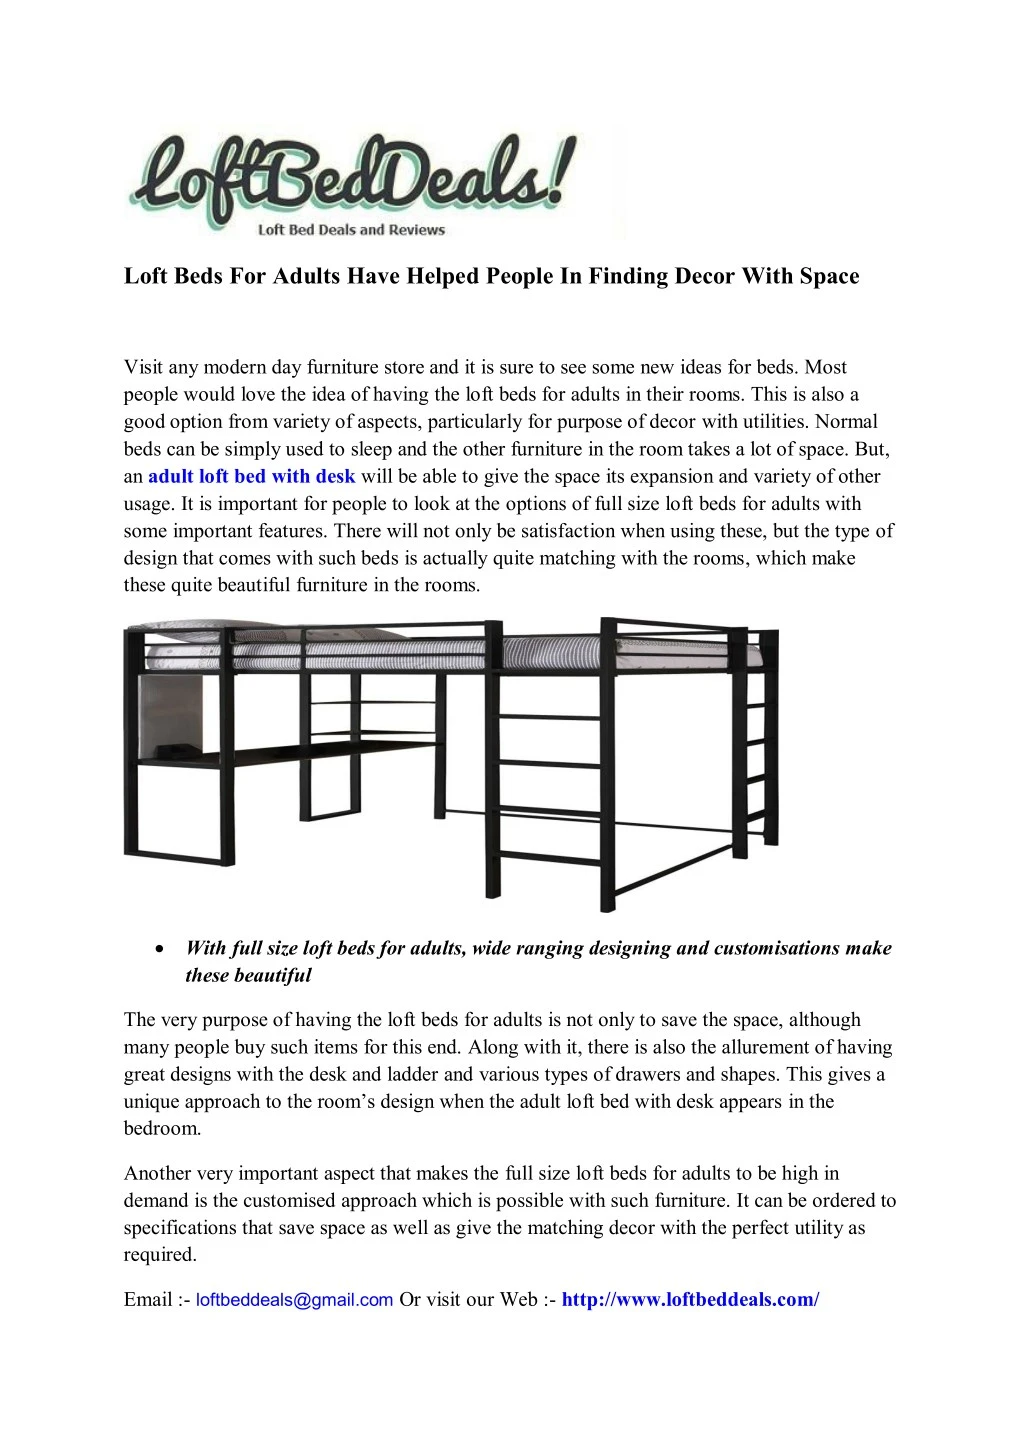 loft beds for adults have helped people